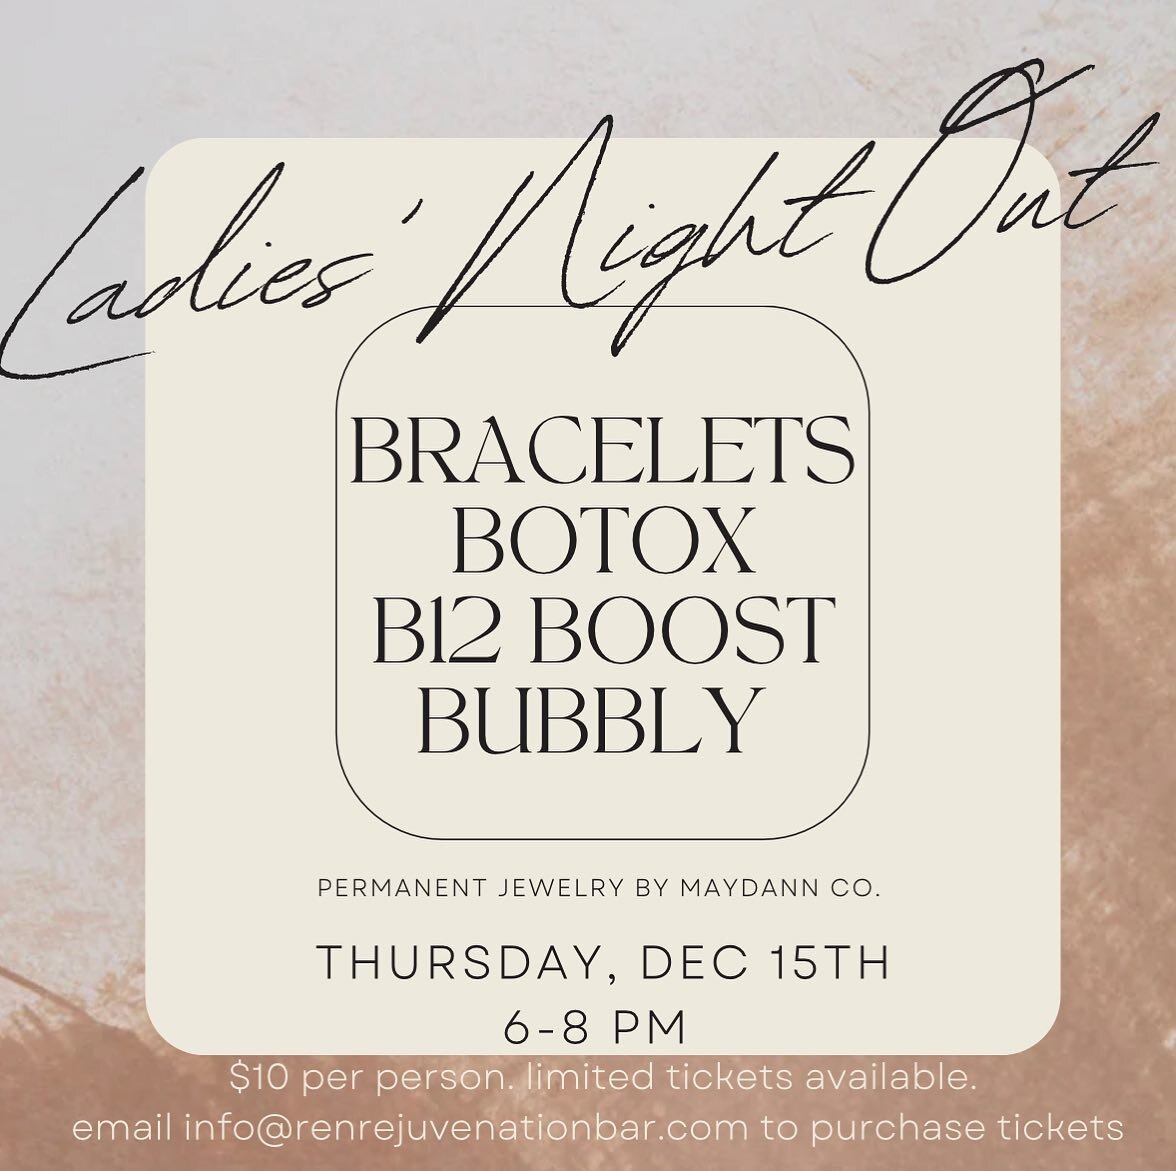 Join us Thursday, Dec 15th from 6-8 pm for Ladies&rsquo; Night Out!

✨ Permanent jewelry for purchase offered by @maydannco 
✨ RENtox discounted to $11/unit 
✨ All vitamin injections $20

Bubbly + light snacks will be served 🥂

Email info@renrejuven